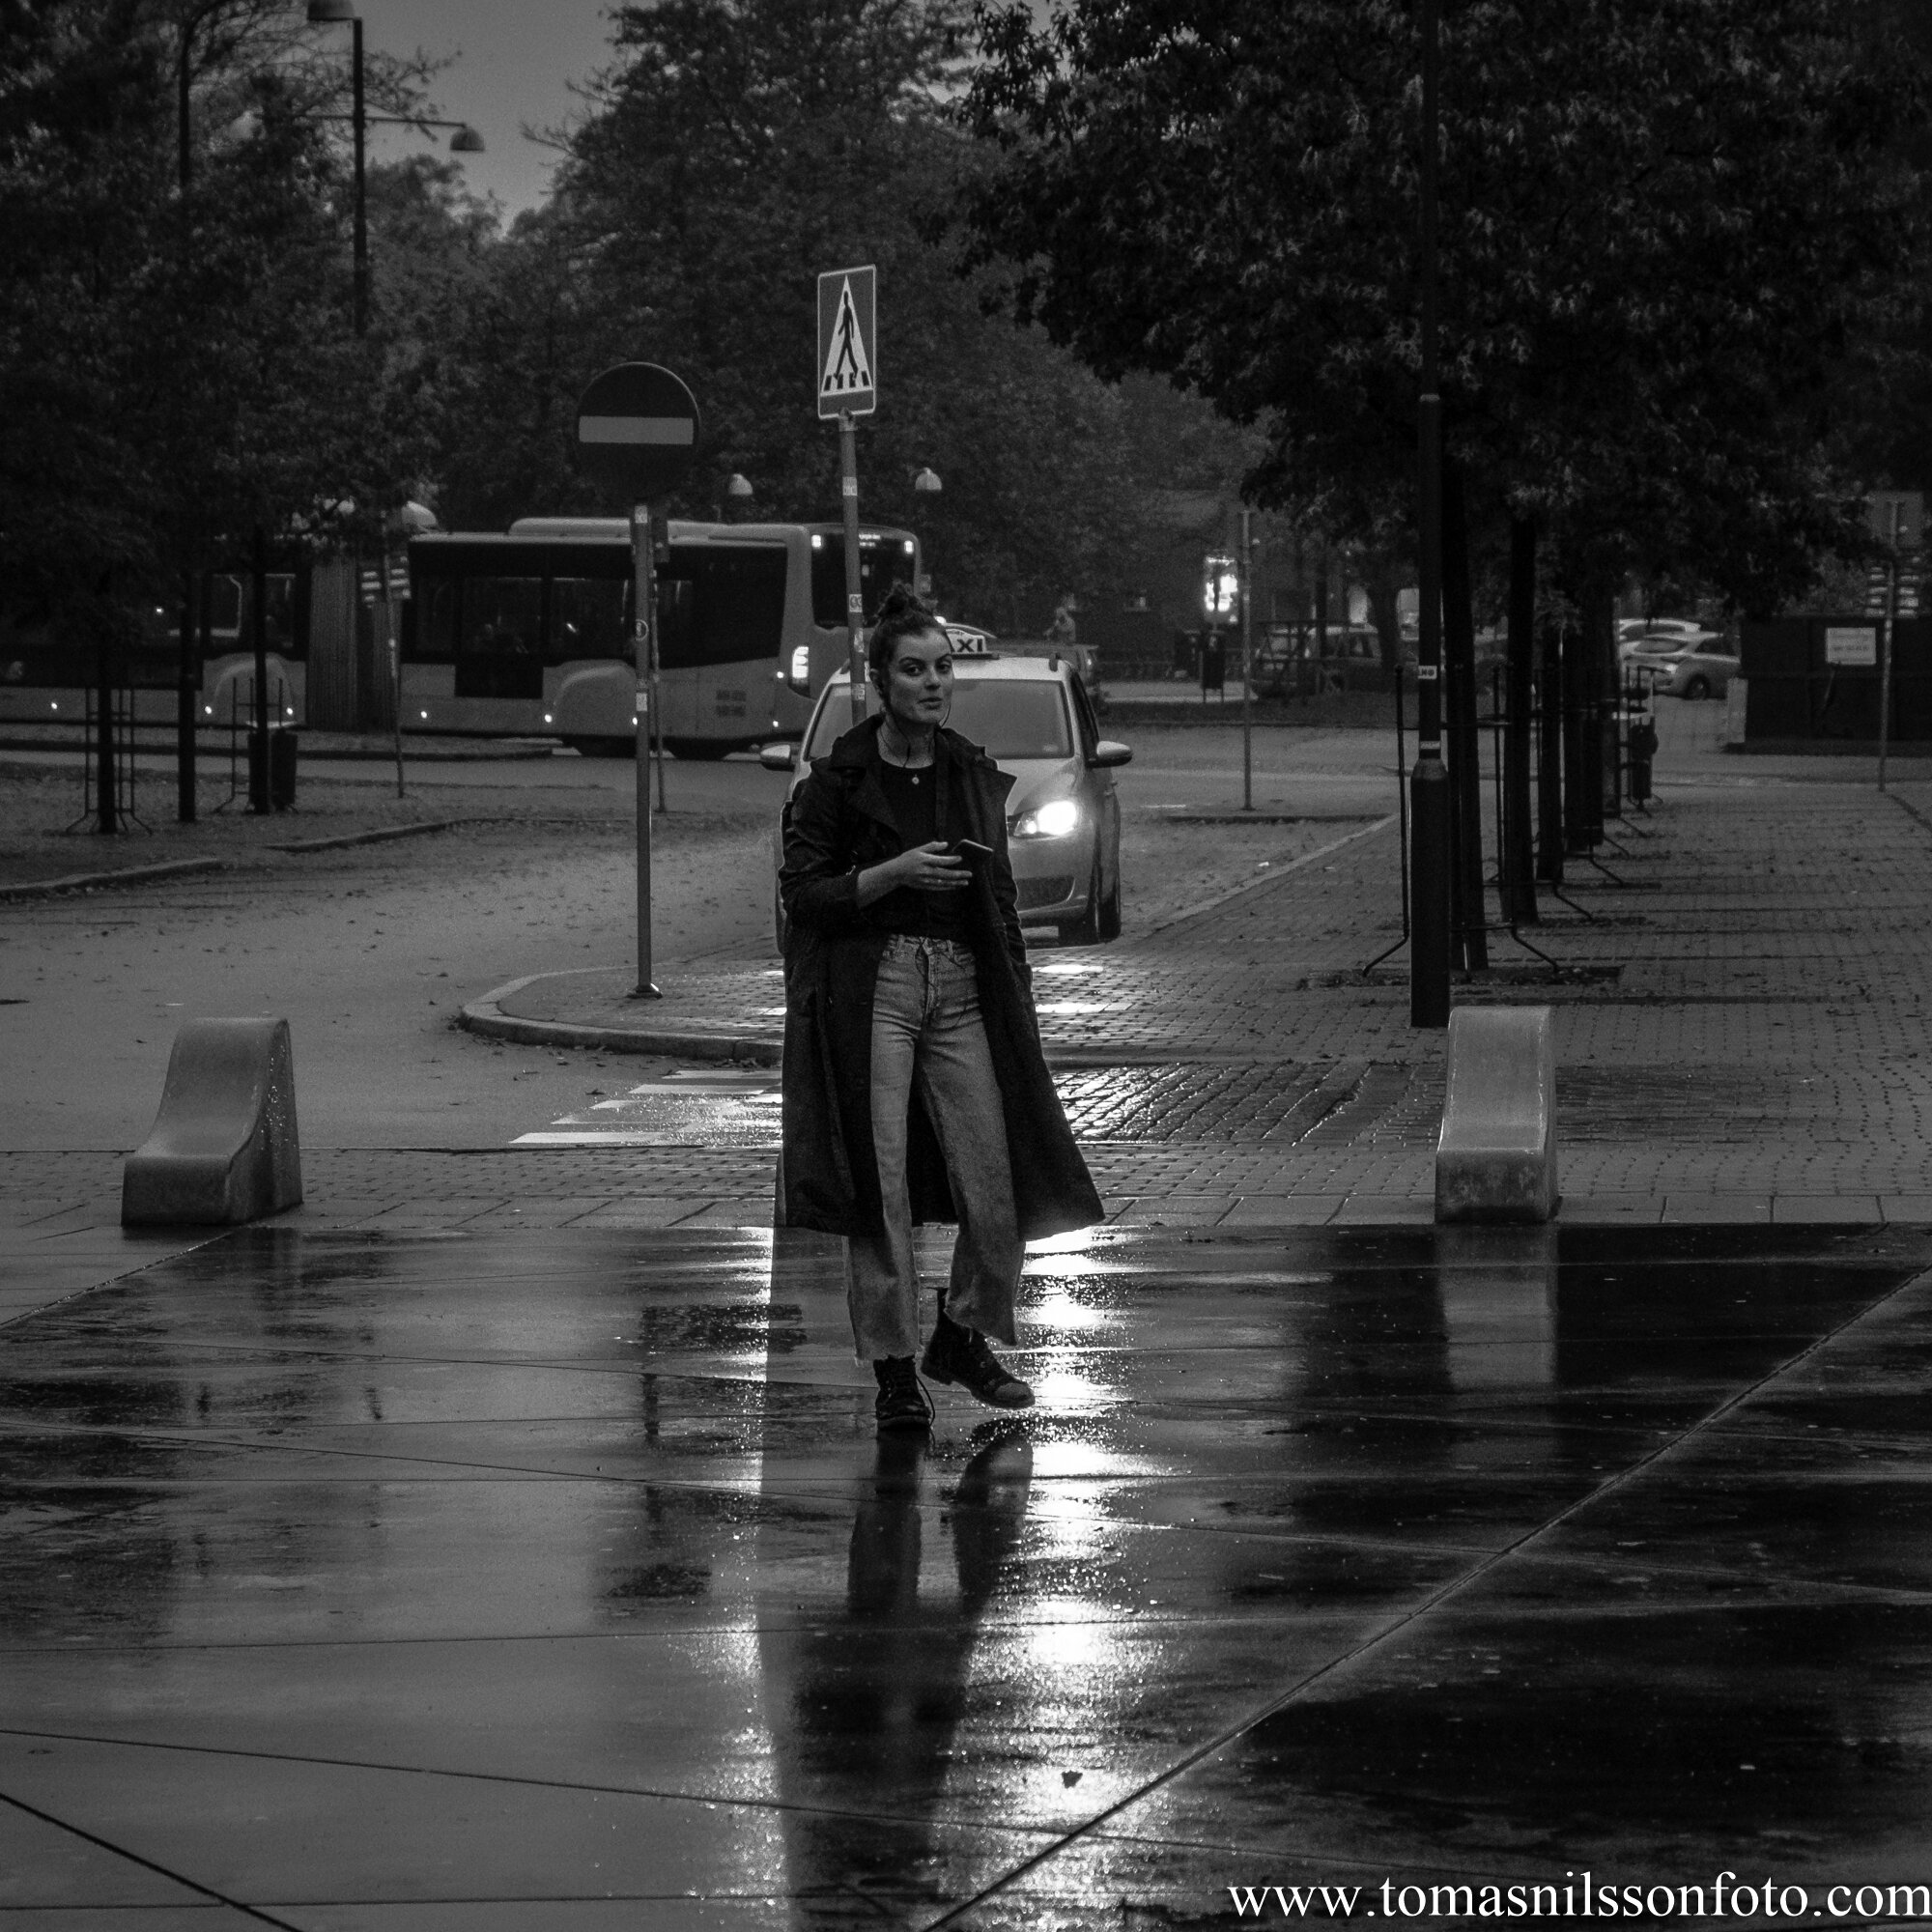 Day 291 - October 18: Lady in the rain